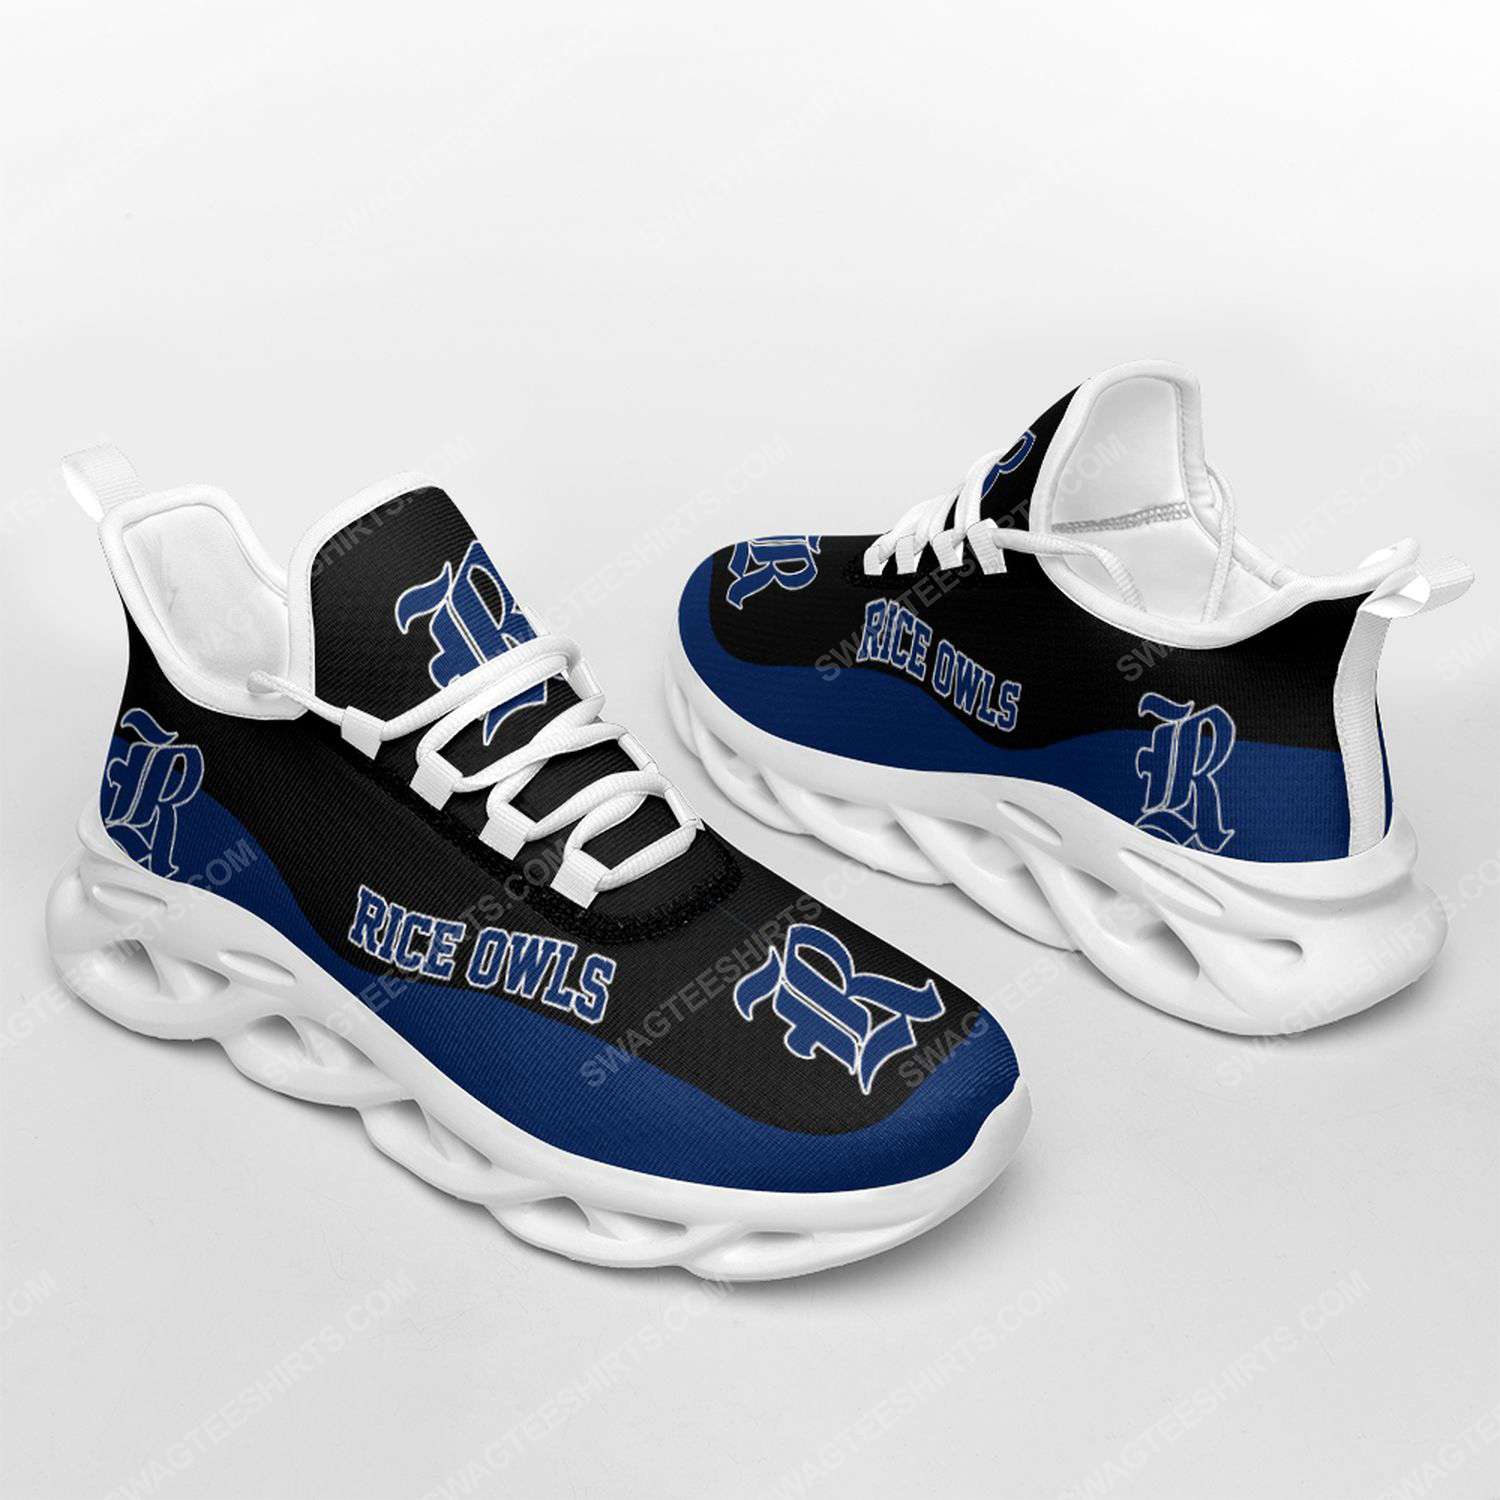 [special edition] The rice owls football team max soul shoes – Maria